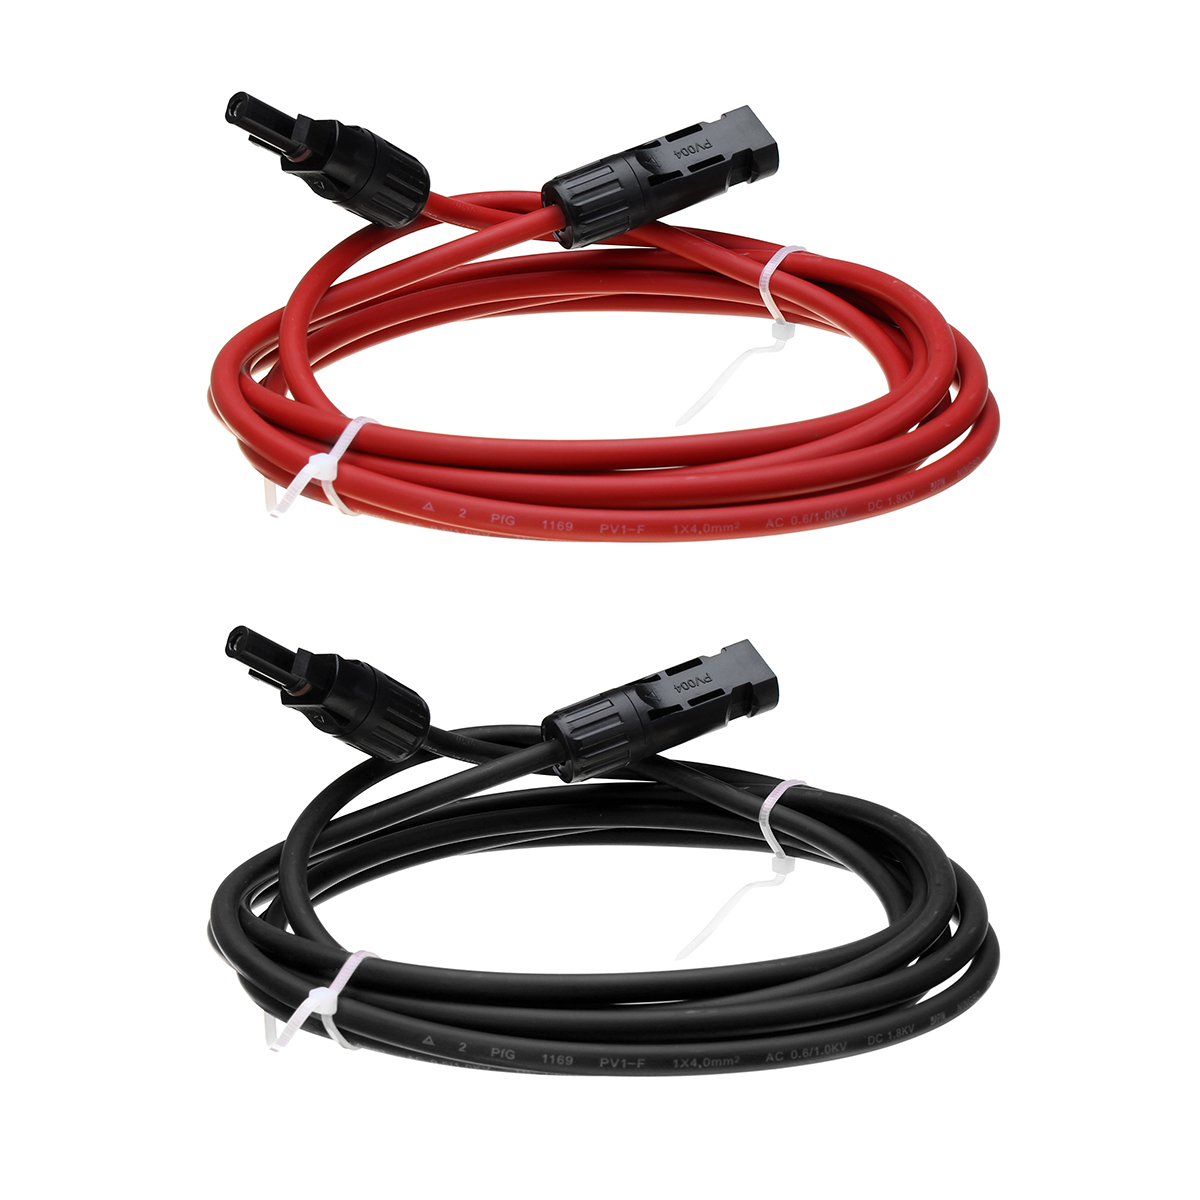 3M AWG12 Black or Red MC4 Connector Solar Panel Extension Cable Wire 10